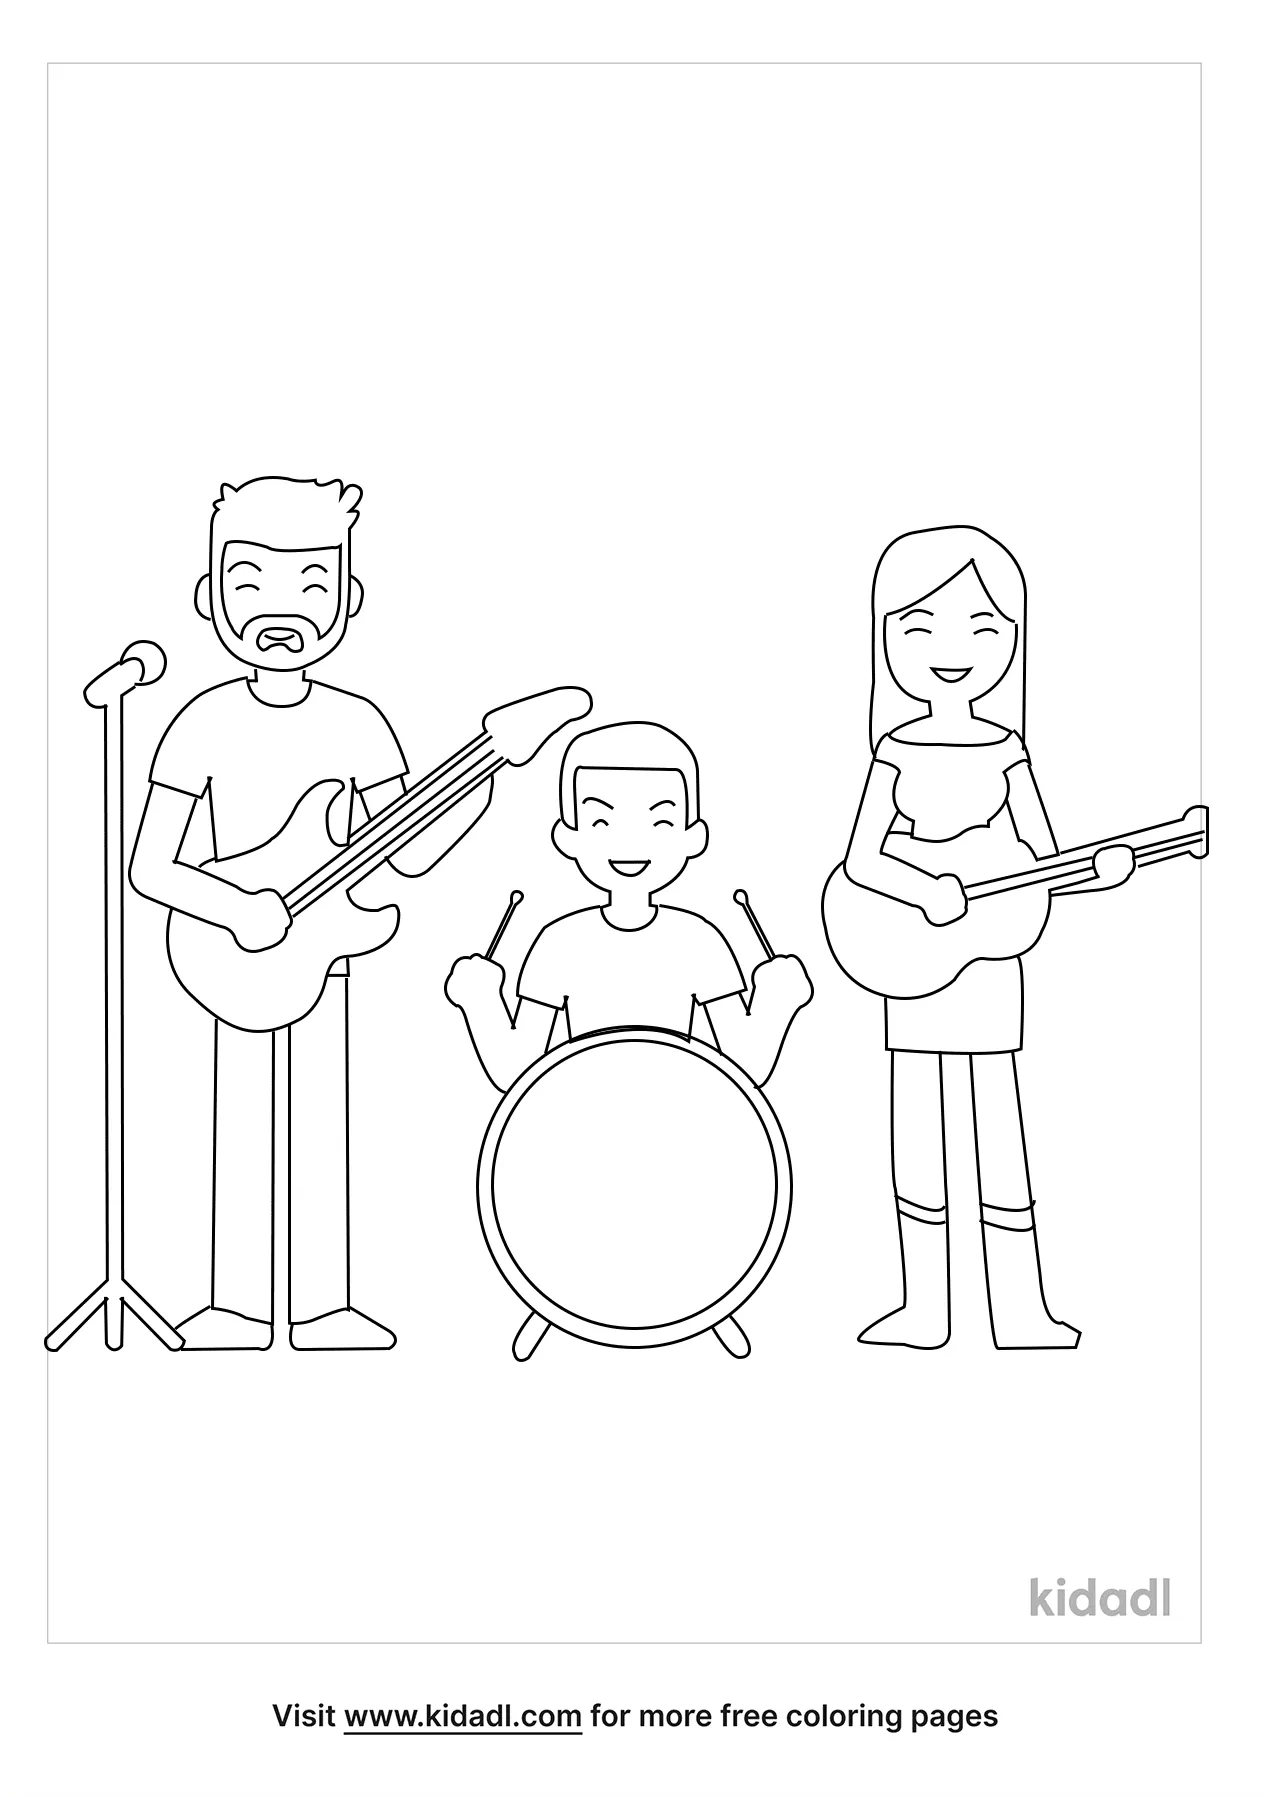 Free rock band coloring page coloring page printables